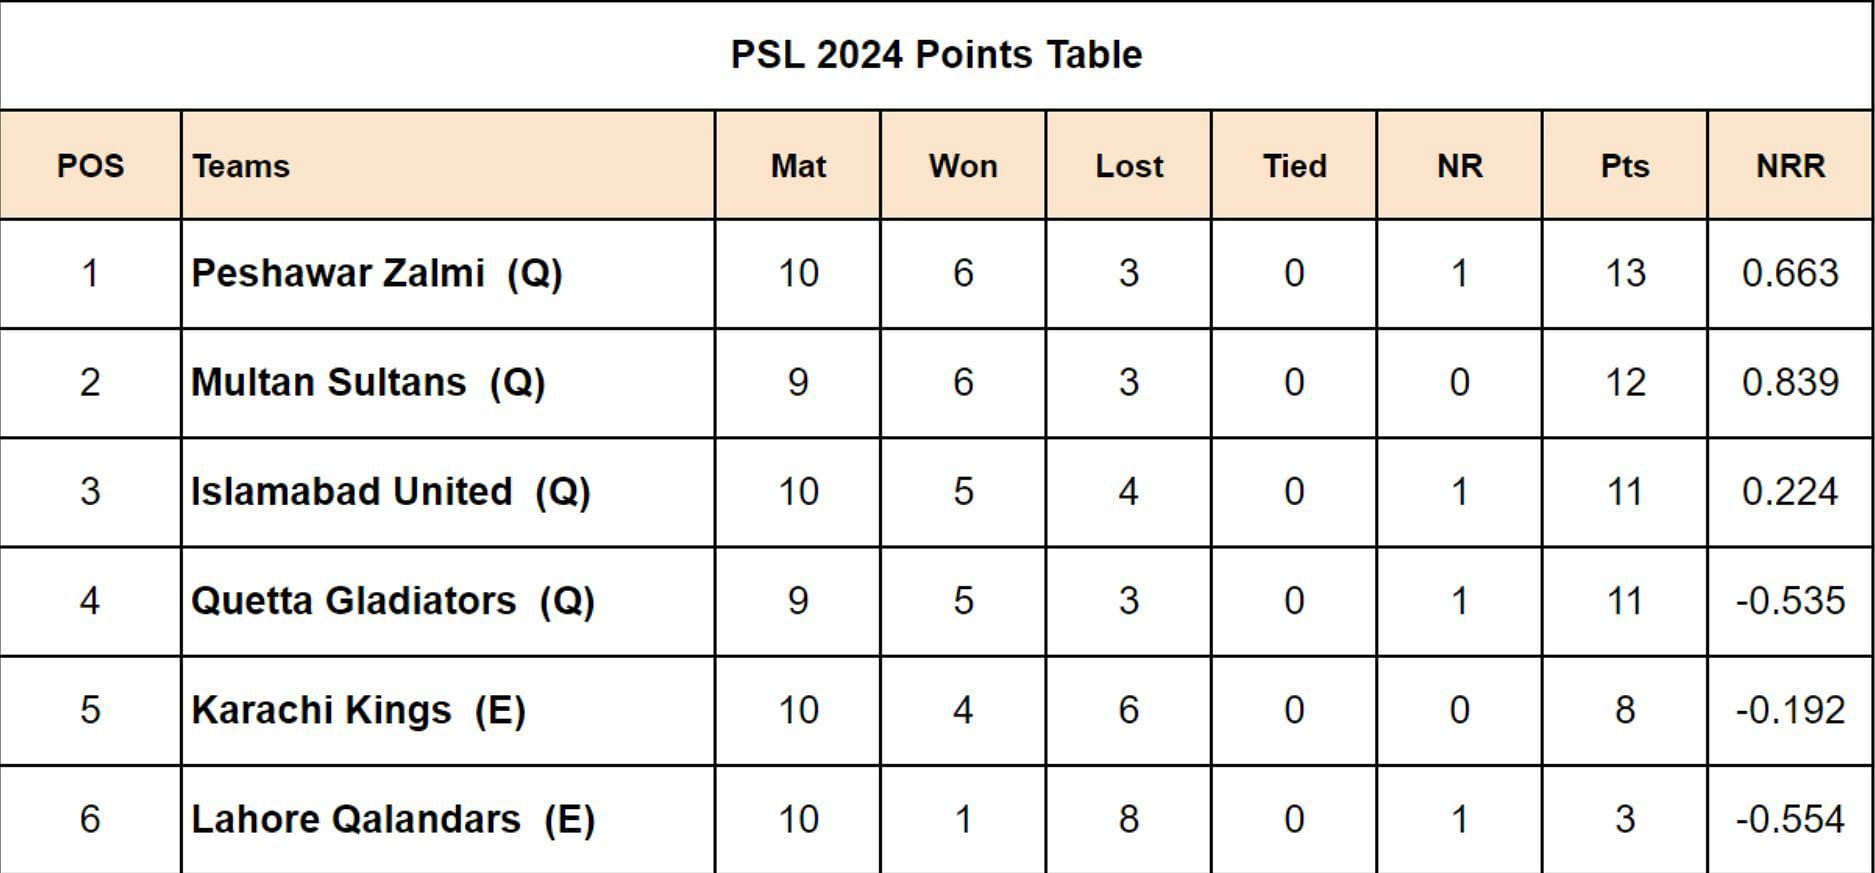 PSL 2024 Points Table Updated after Match 29